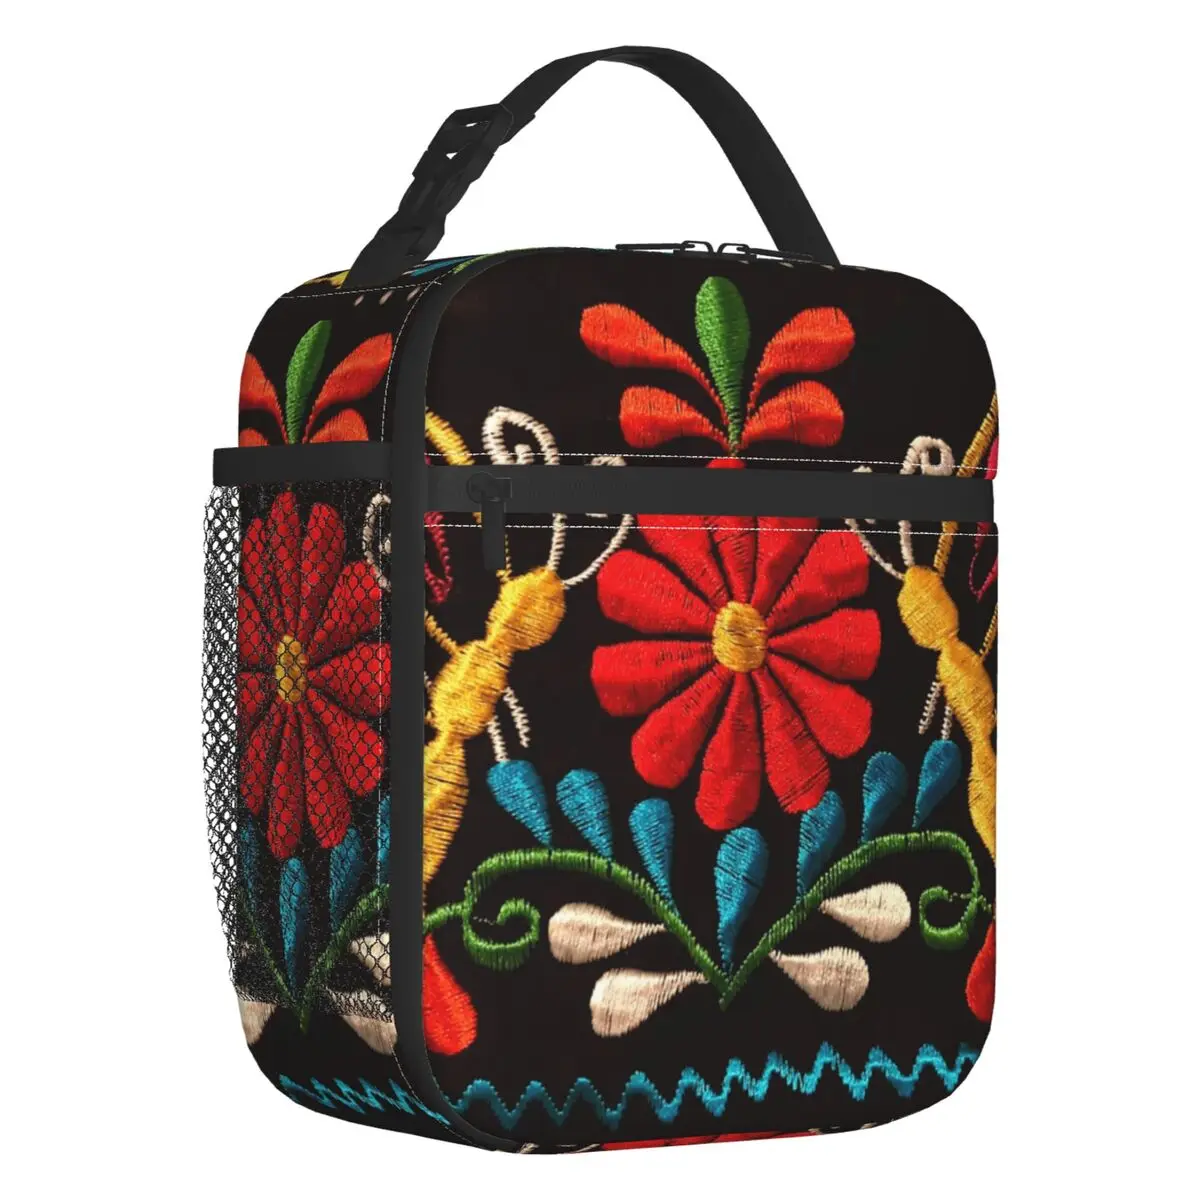 Mexican Butterflies Flower Insulated Lunch Bag Otomi 3D Print Embroidery Pattern Cooler Thermal Bento Box Office Picnic Travel